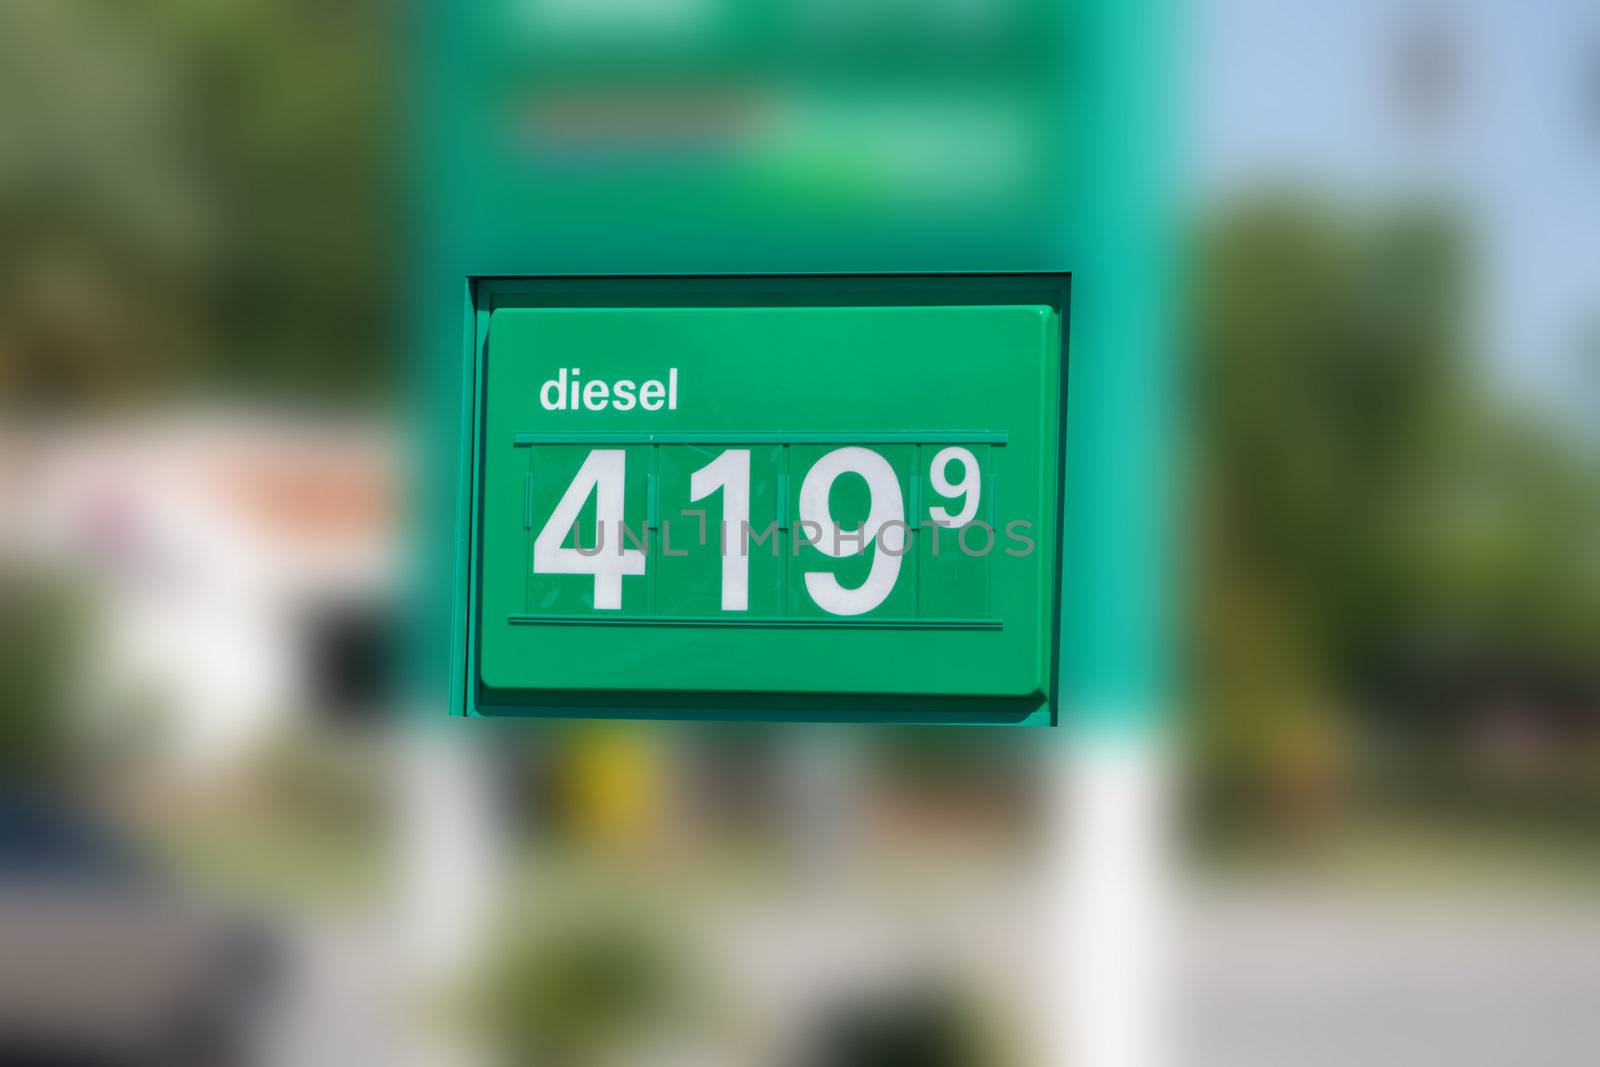 Eye Popping Diesel Fuel Gas Price Sign was capured during a period of record setting gas prices when the price of a barrel of oil was setting new levels.
